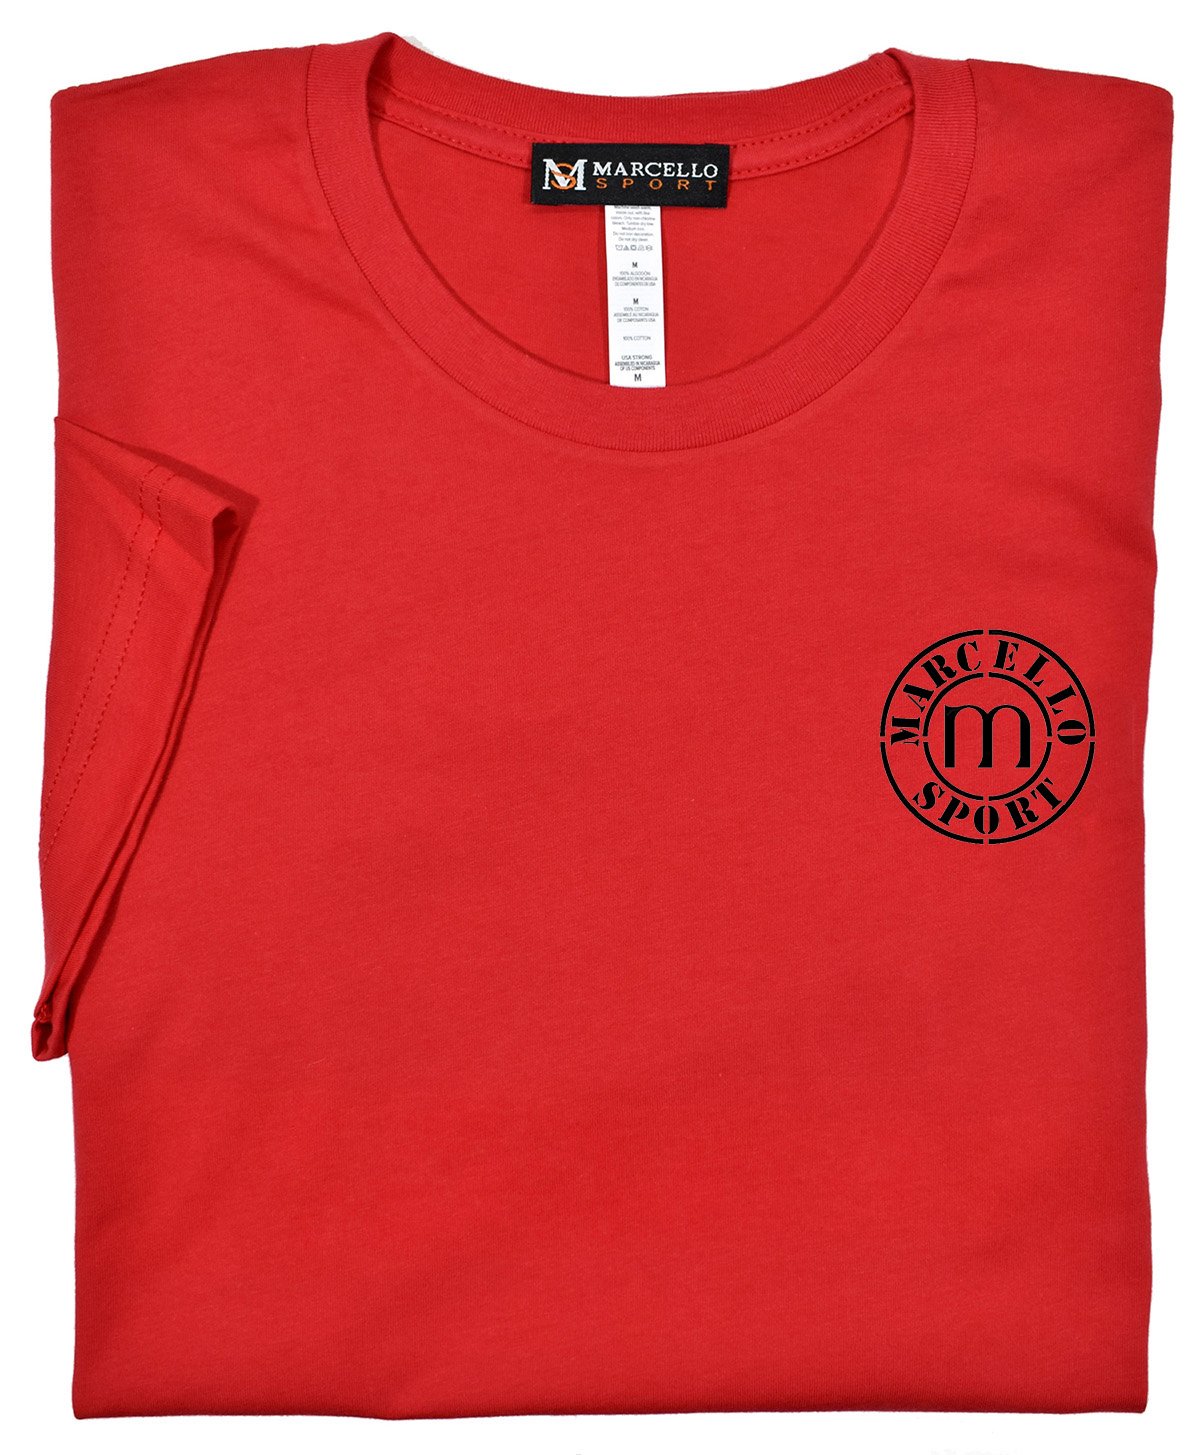 Marcello Sport Logo Tee  100% soft cotton, preshrunk. Ultra soft cotton feel. Contemporary fit, we suggest ordering one size up if between sizes or prefer a looser fit. Machine wash and dry.